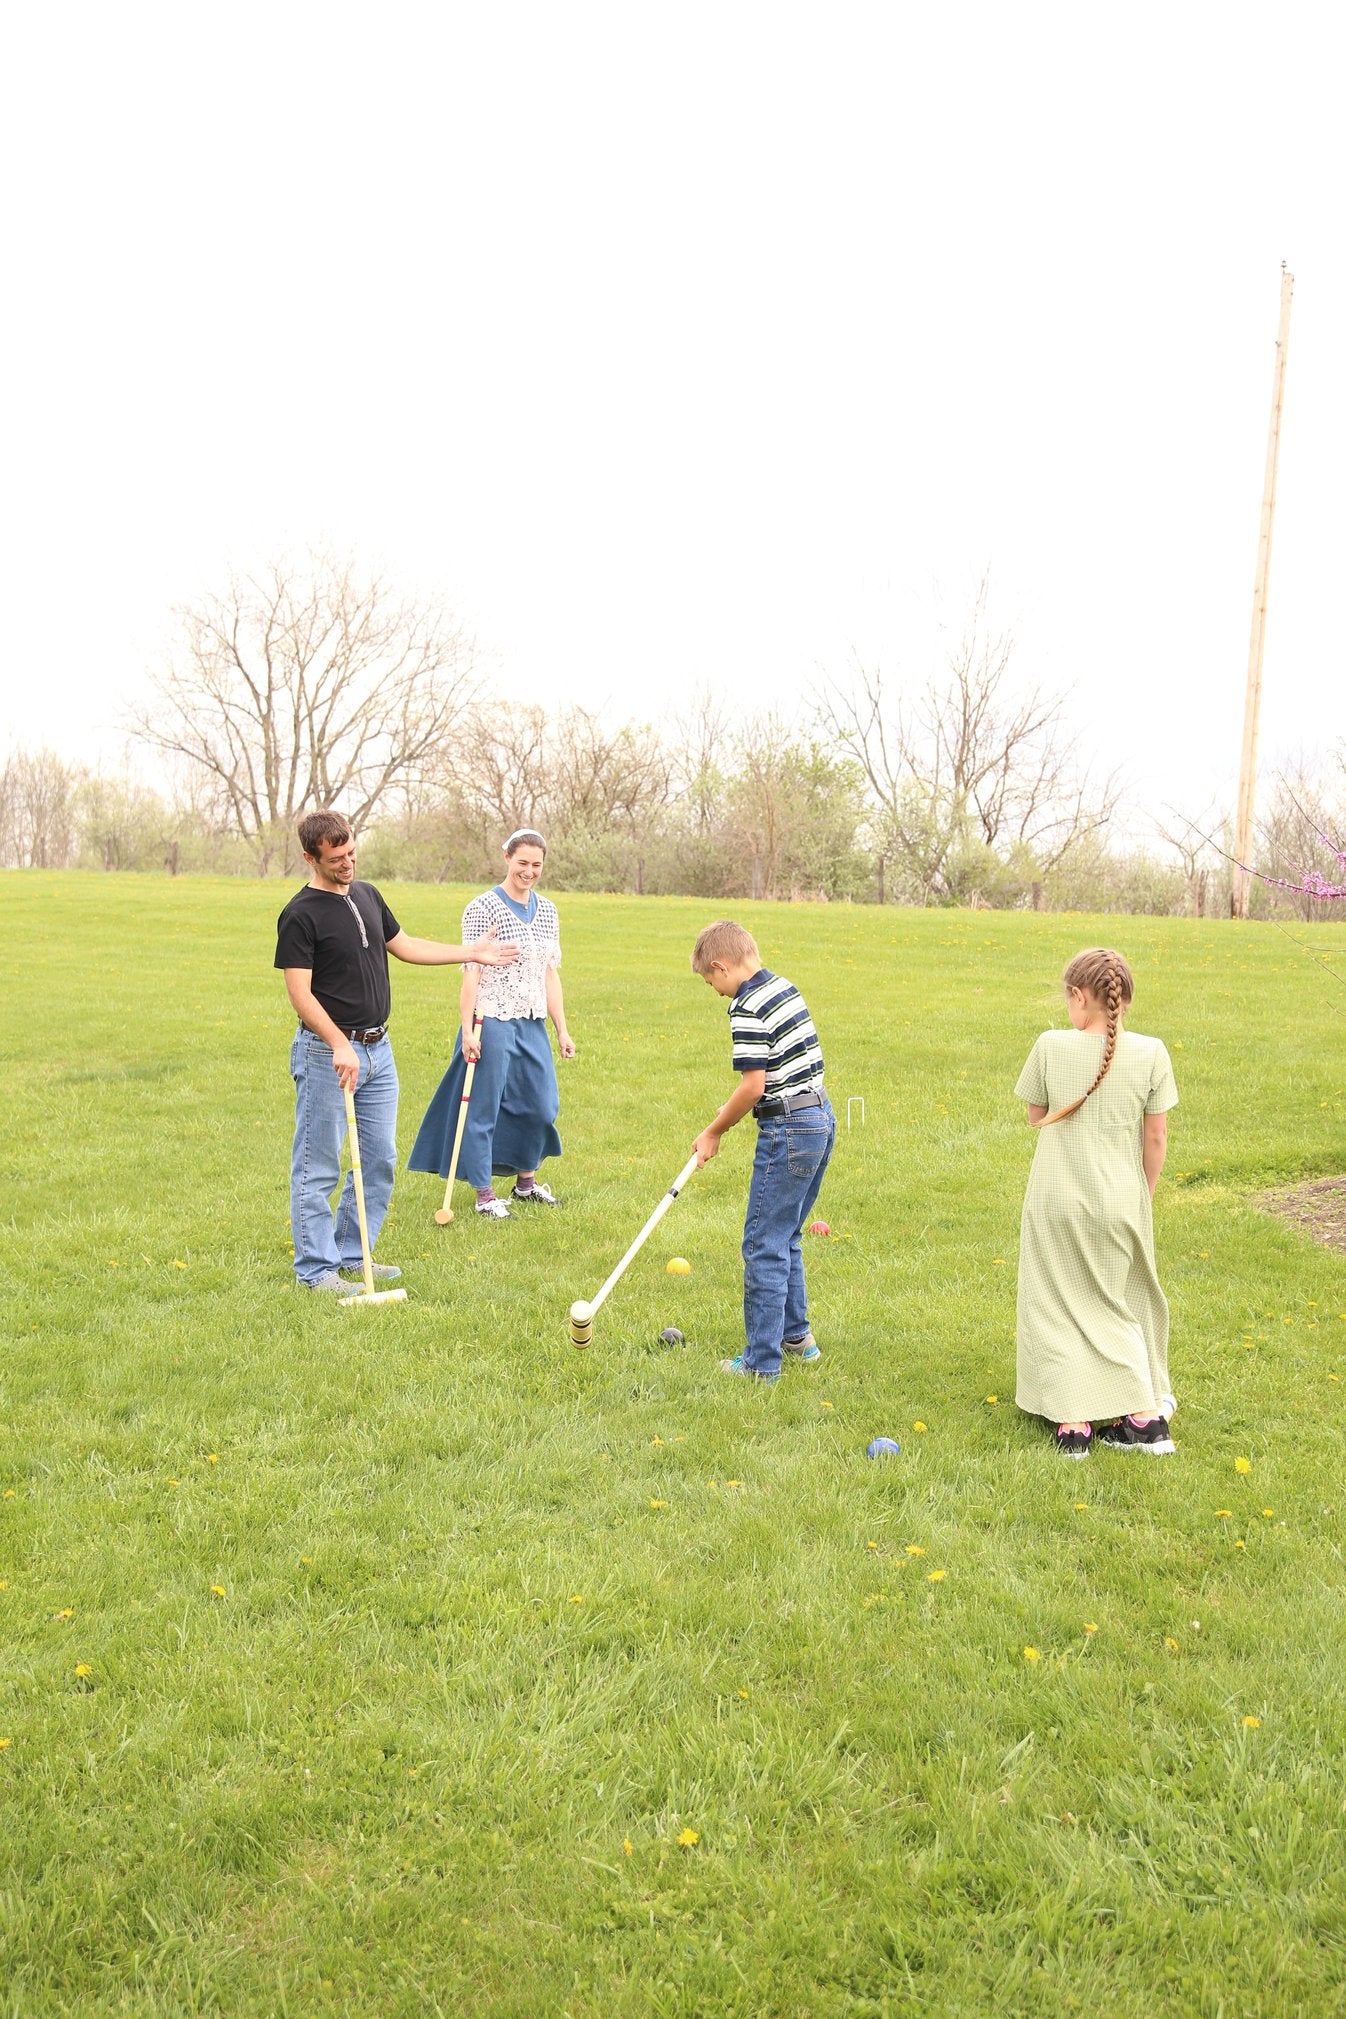 Amish-Made Deluxe Flag Croquet Golf Game Set 